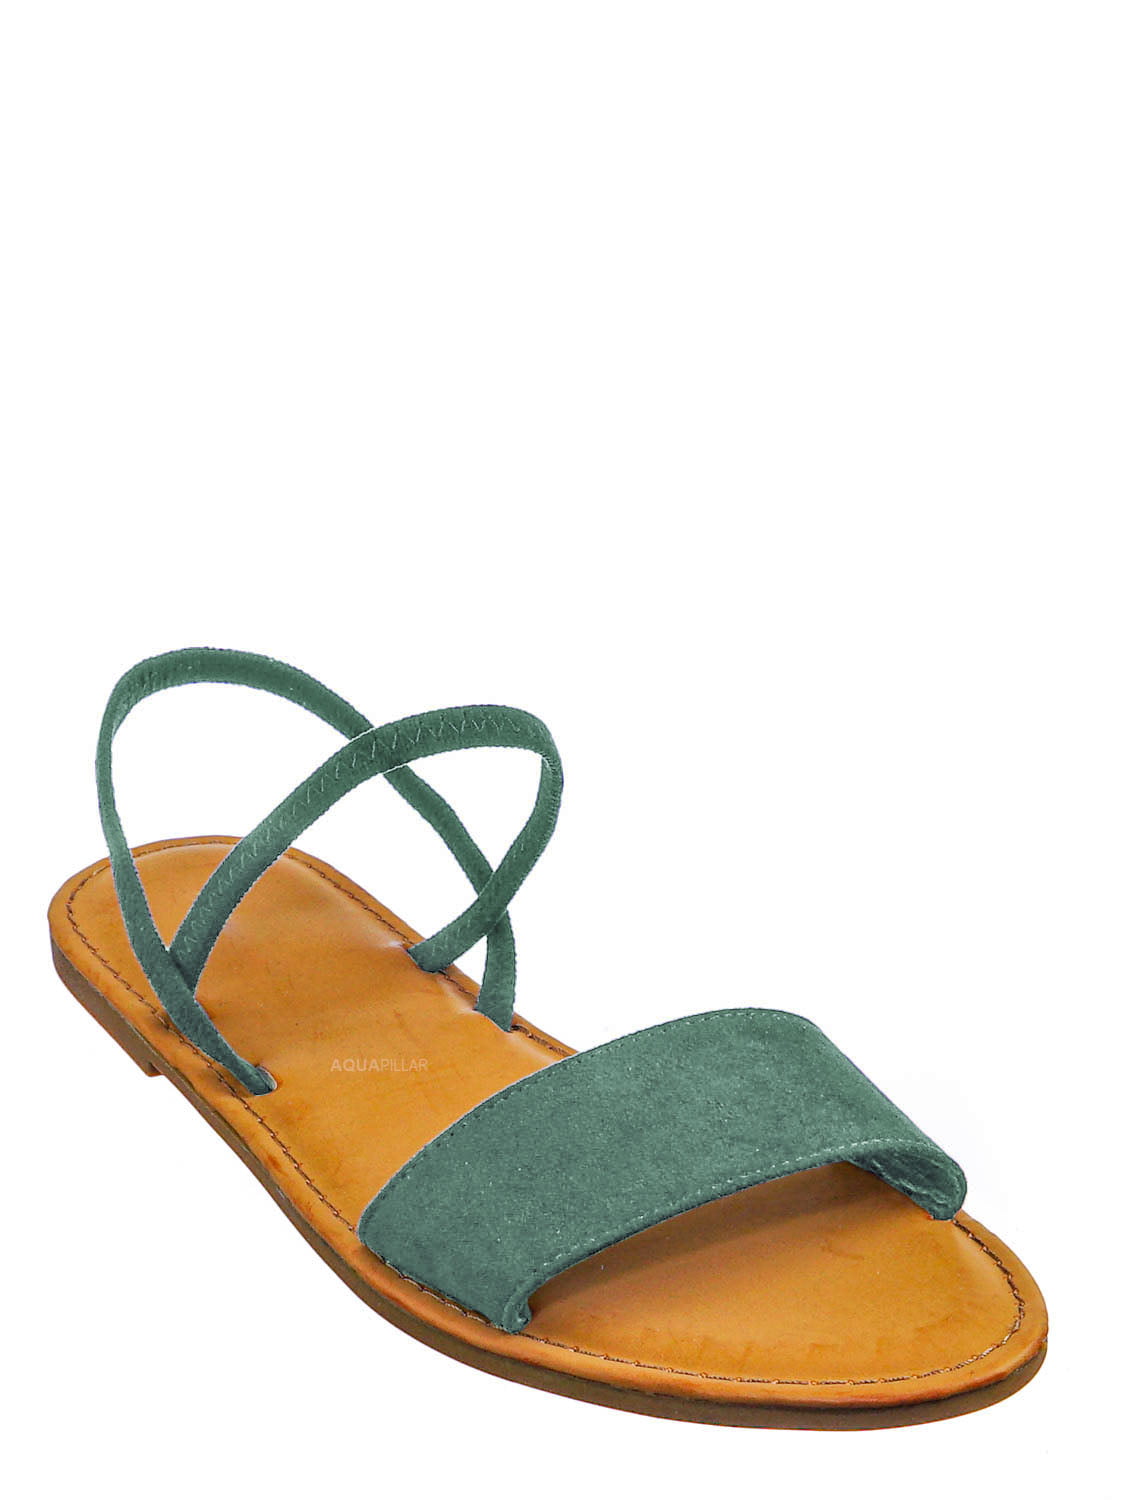 bamboo shoes sandals